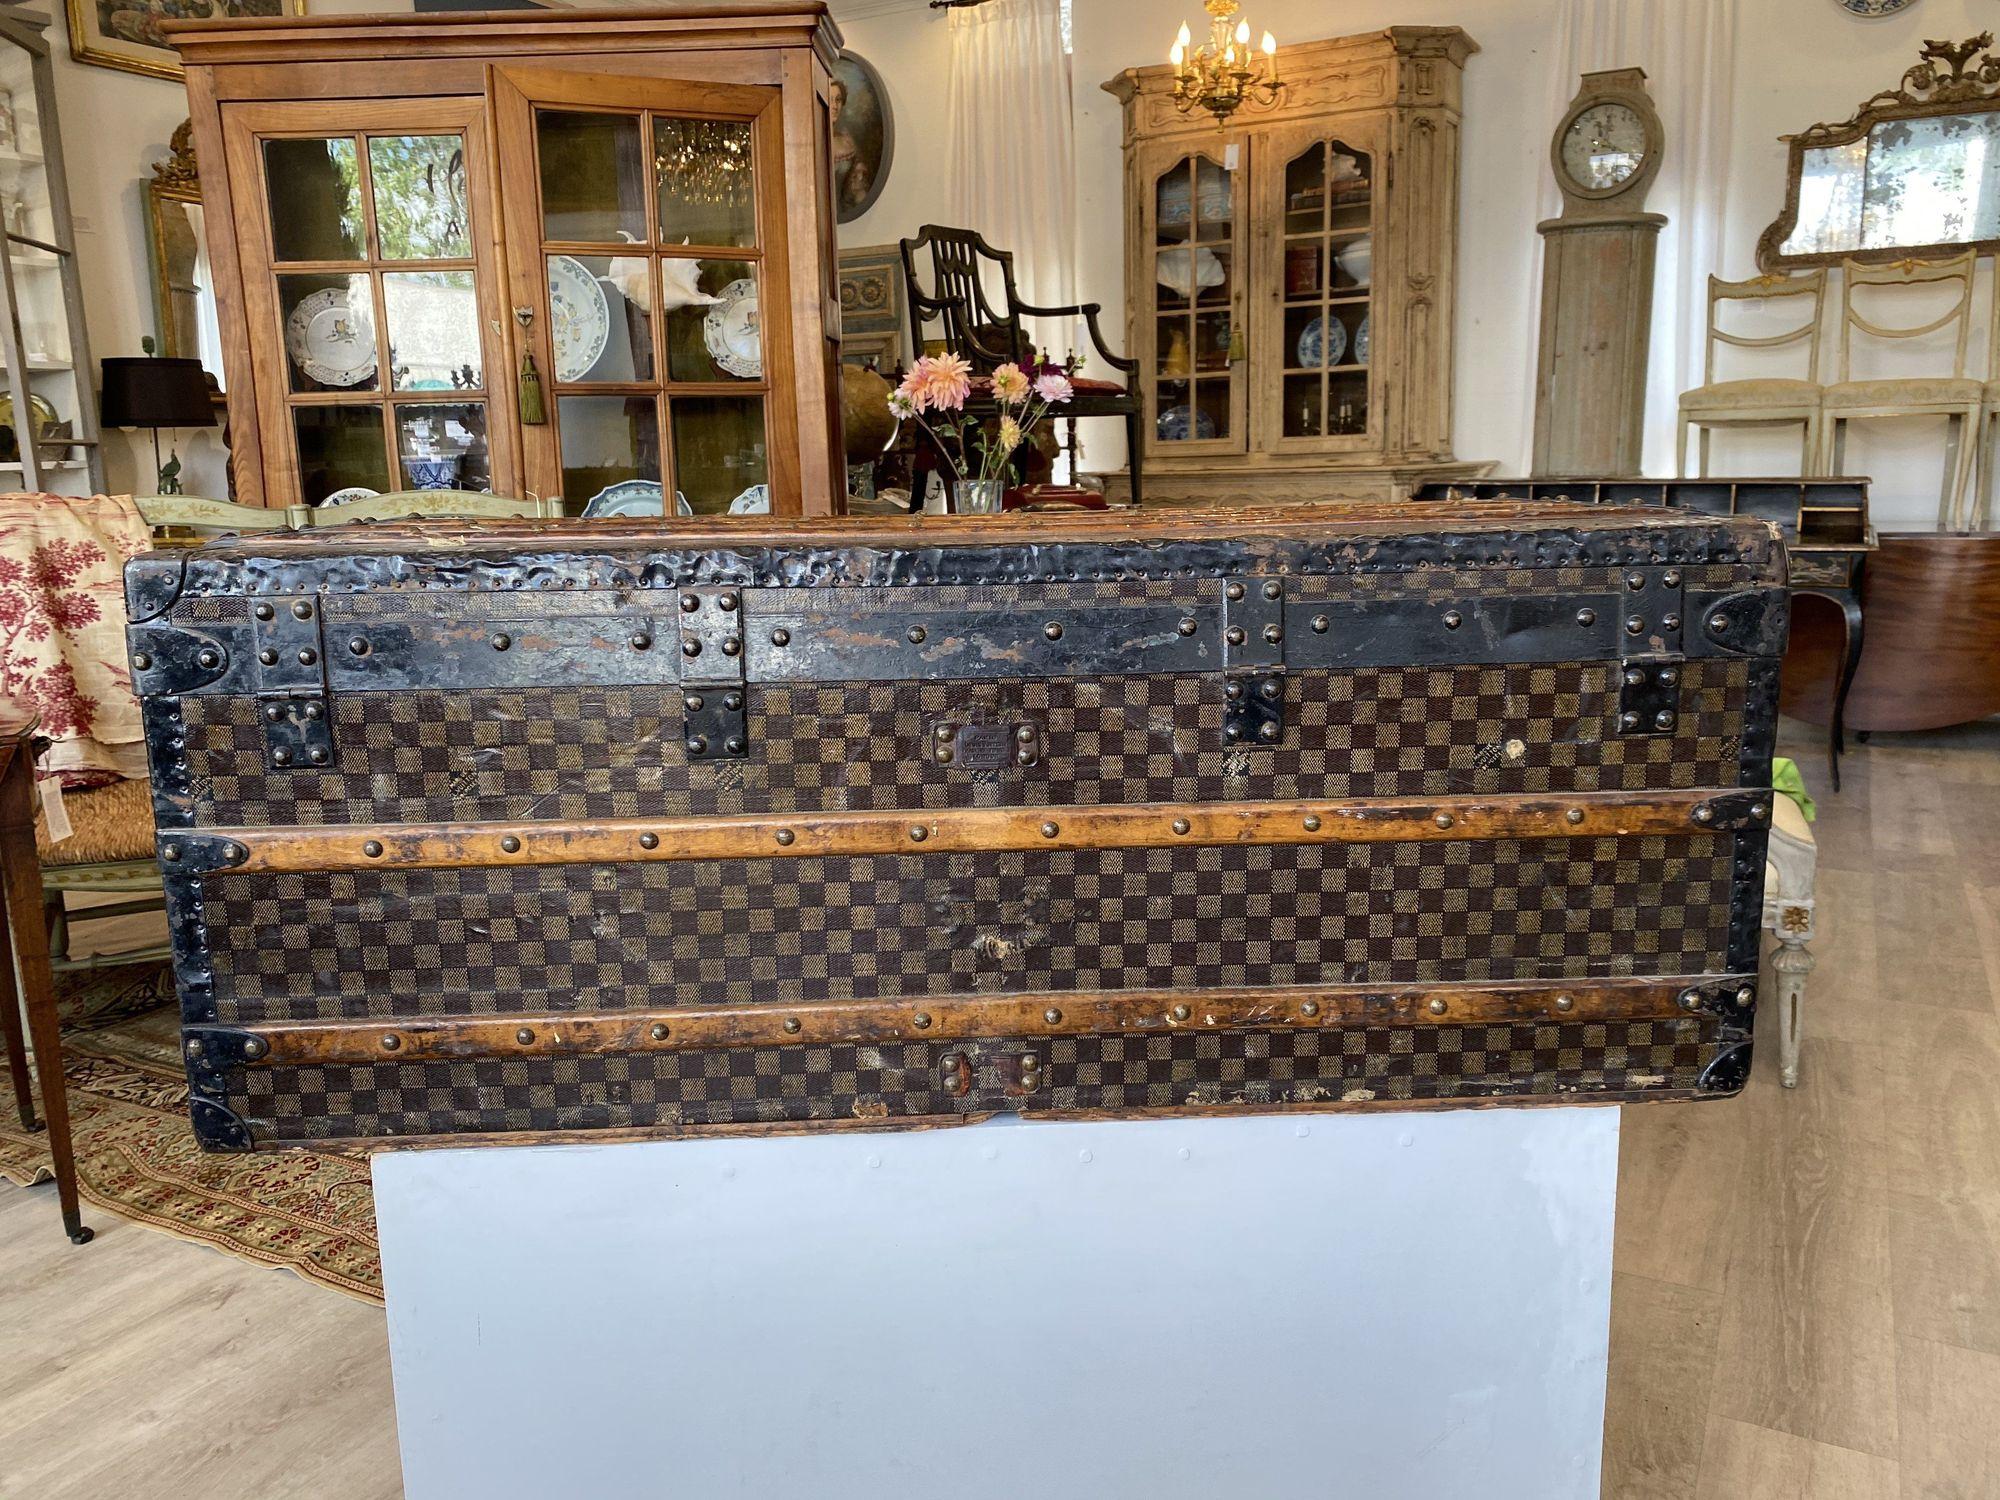 Antique Louis Vuitton Damier pattern trunk, lock plate with Paris rue Scribe Address and London Strand Address; black enameled metal edges, iron handles and bottom, bronze corners, wood slides to long sides and bottom; with 